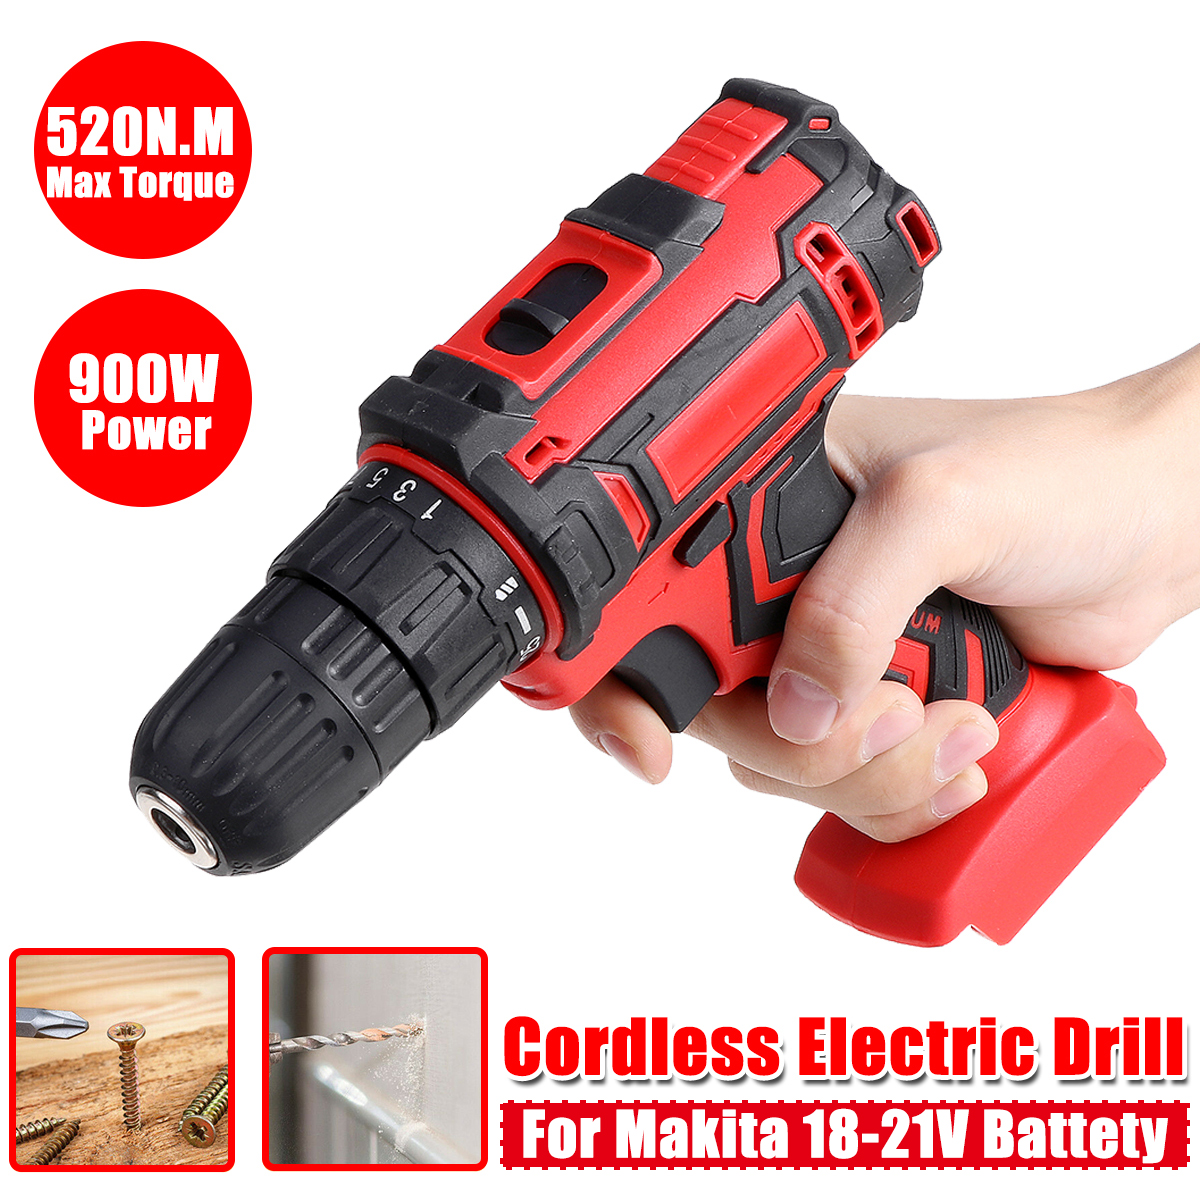 520NM-Cordless-Electric-Drill-Screwdriver-2-Speeds-Fit-For-Makita-18-21V-Battery-1749062-2